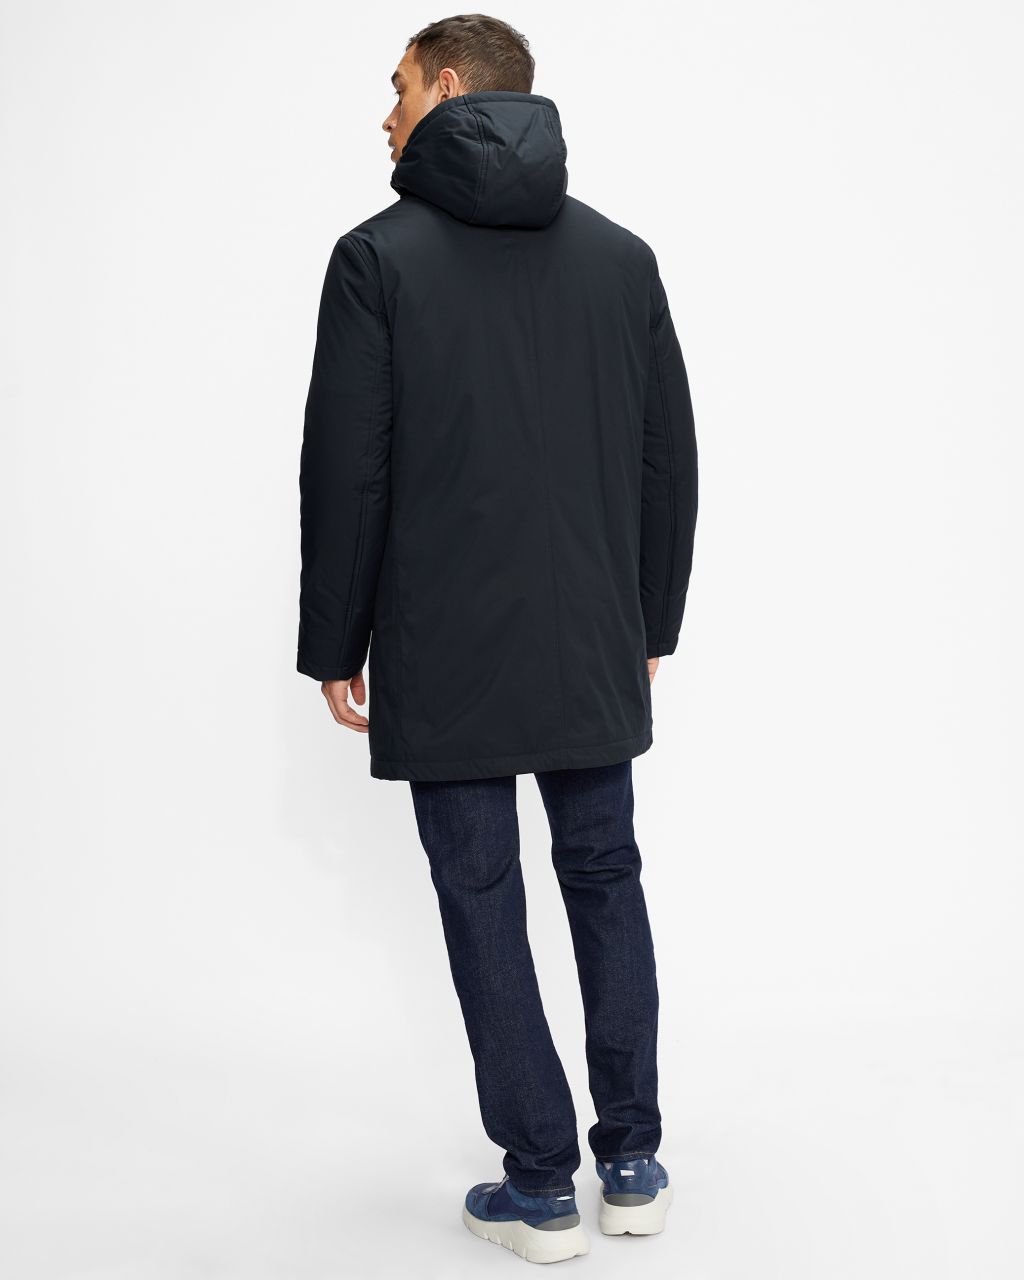 Ted Baker Wadded Coat With Removable Hood in Navy HELVEL, Men's 